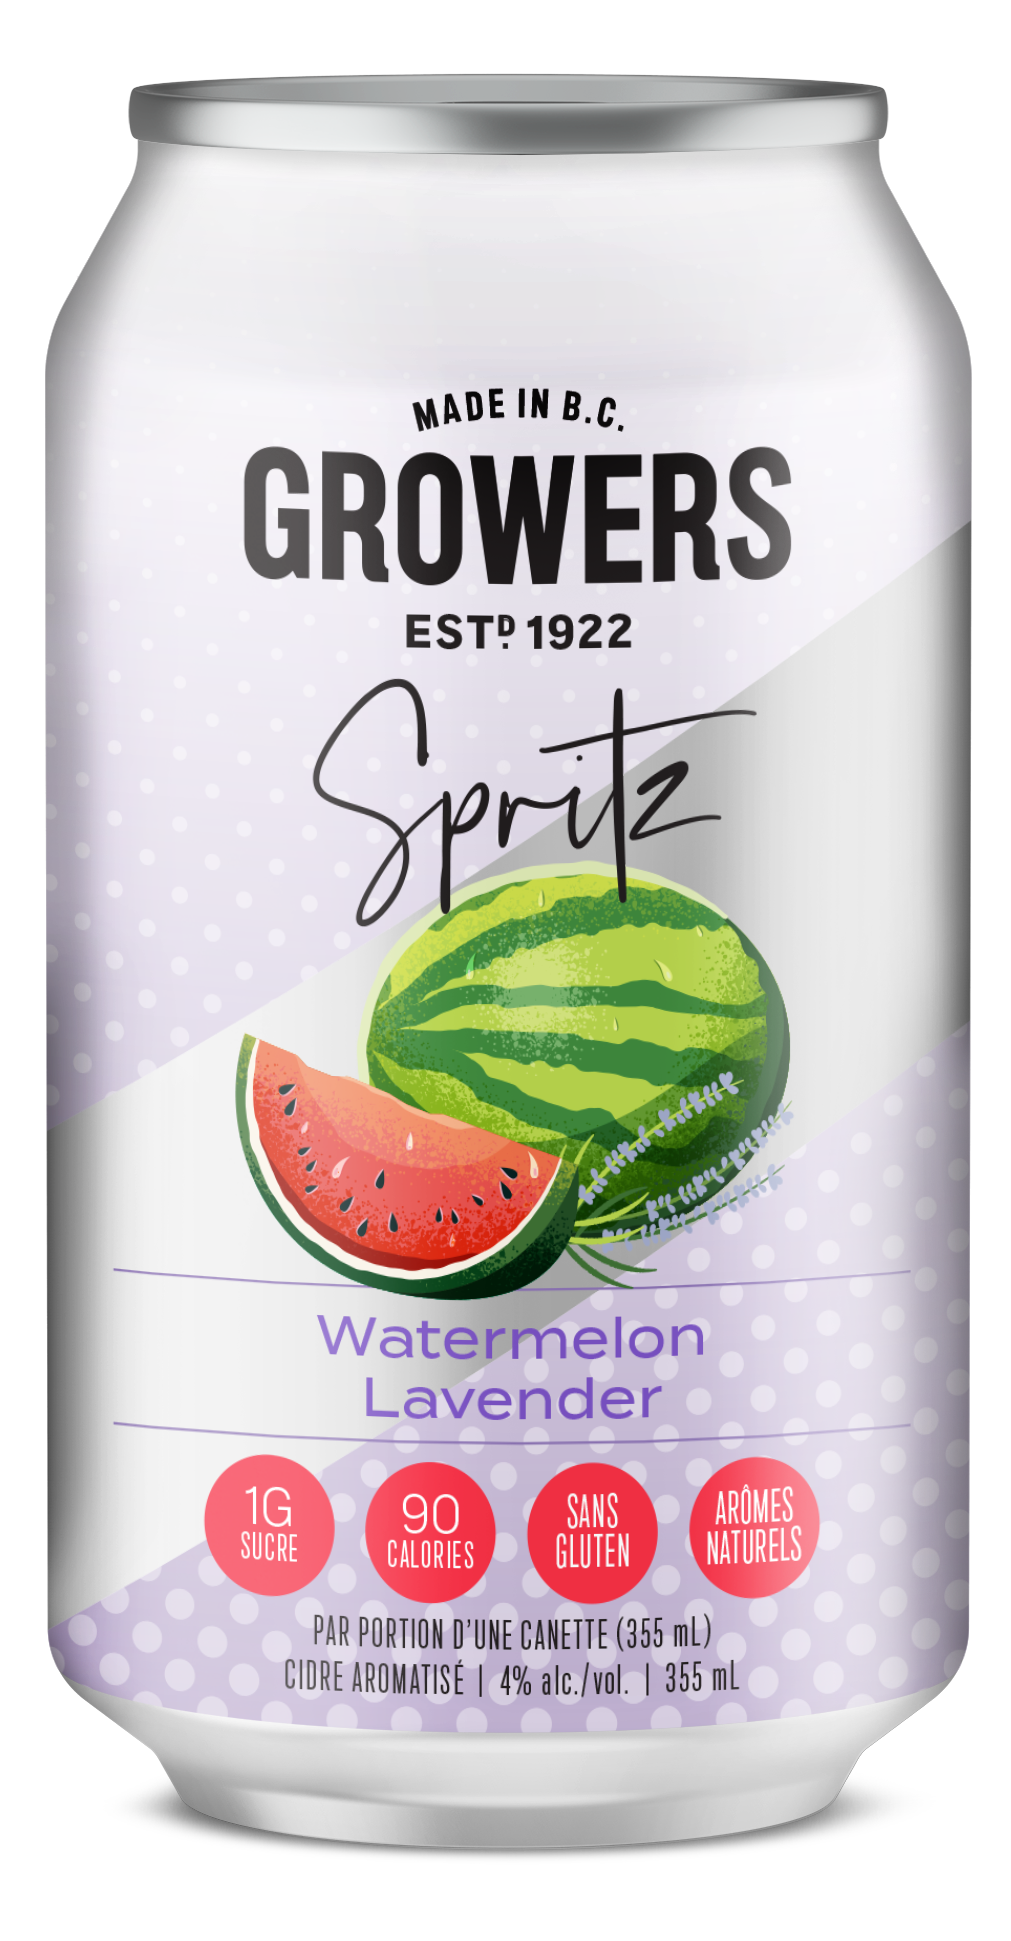 Can of Growers Watermelon Lavender cider